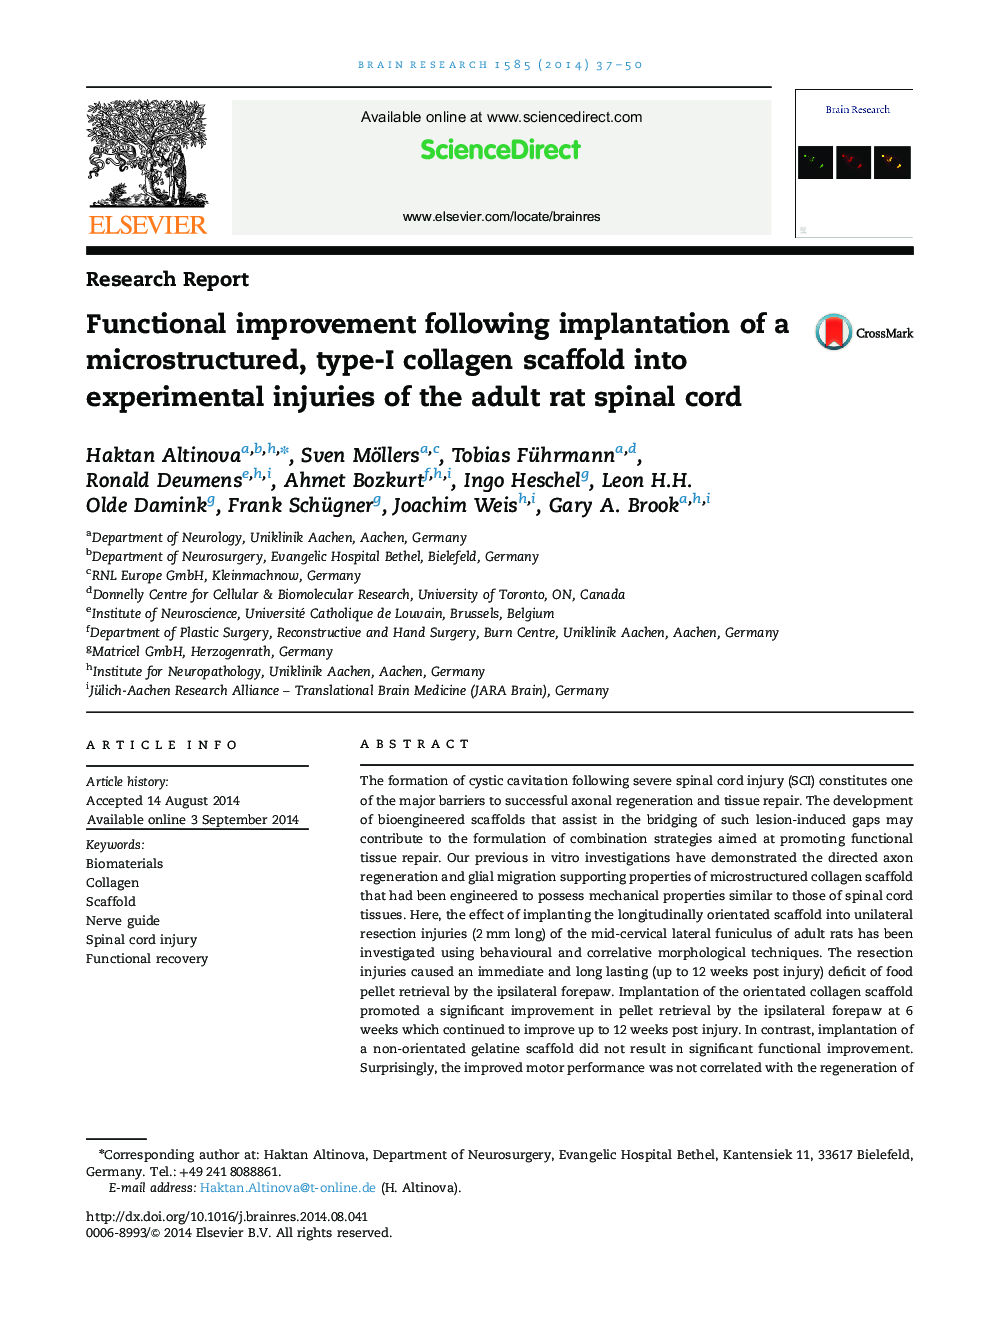 Research ReportFunctional improvement following implantation of a microstructured, type-I collagen scaffold into experimental injuries of the adult rat spinal cord